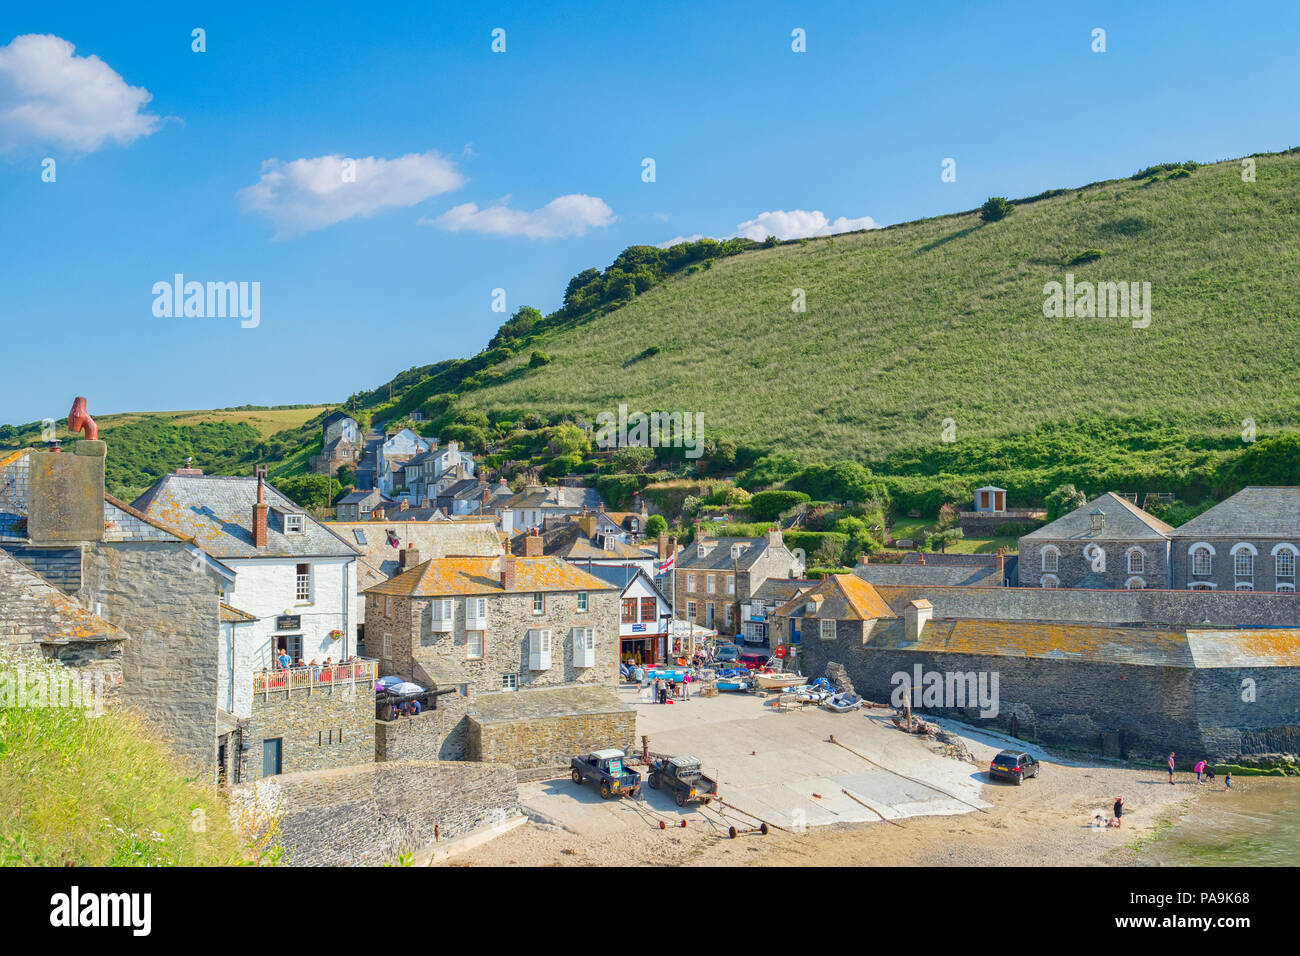 29 June 2018: Port Isaac, Cornwall, UK - The village and slipway during the summer heatwave. The village is used as the location for the TV series Doc Stock Photo